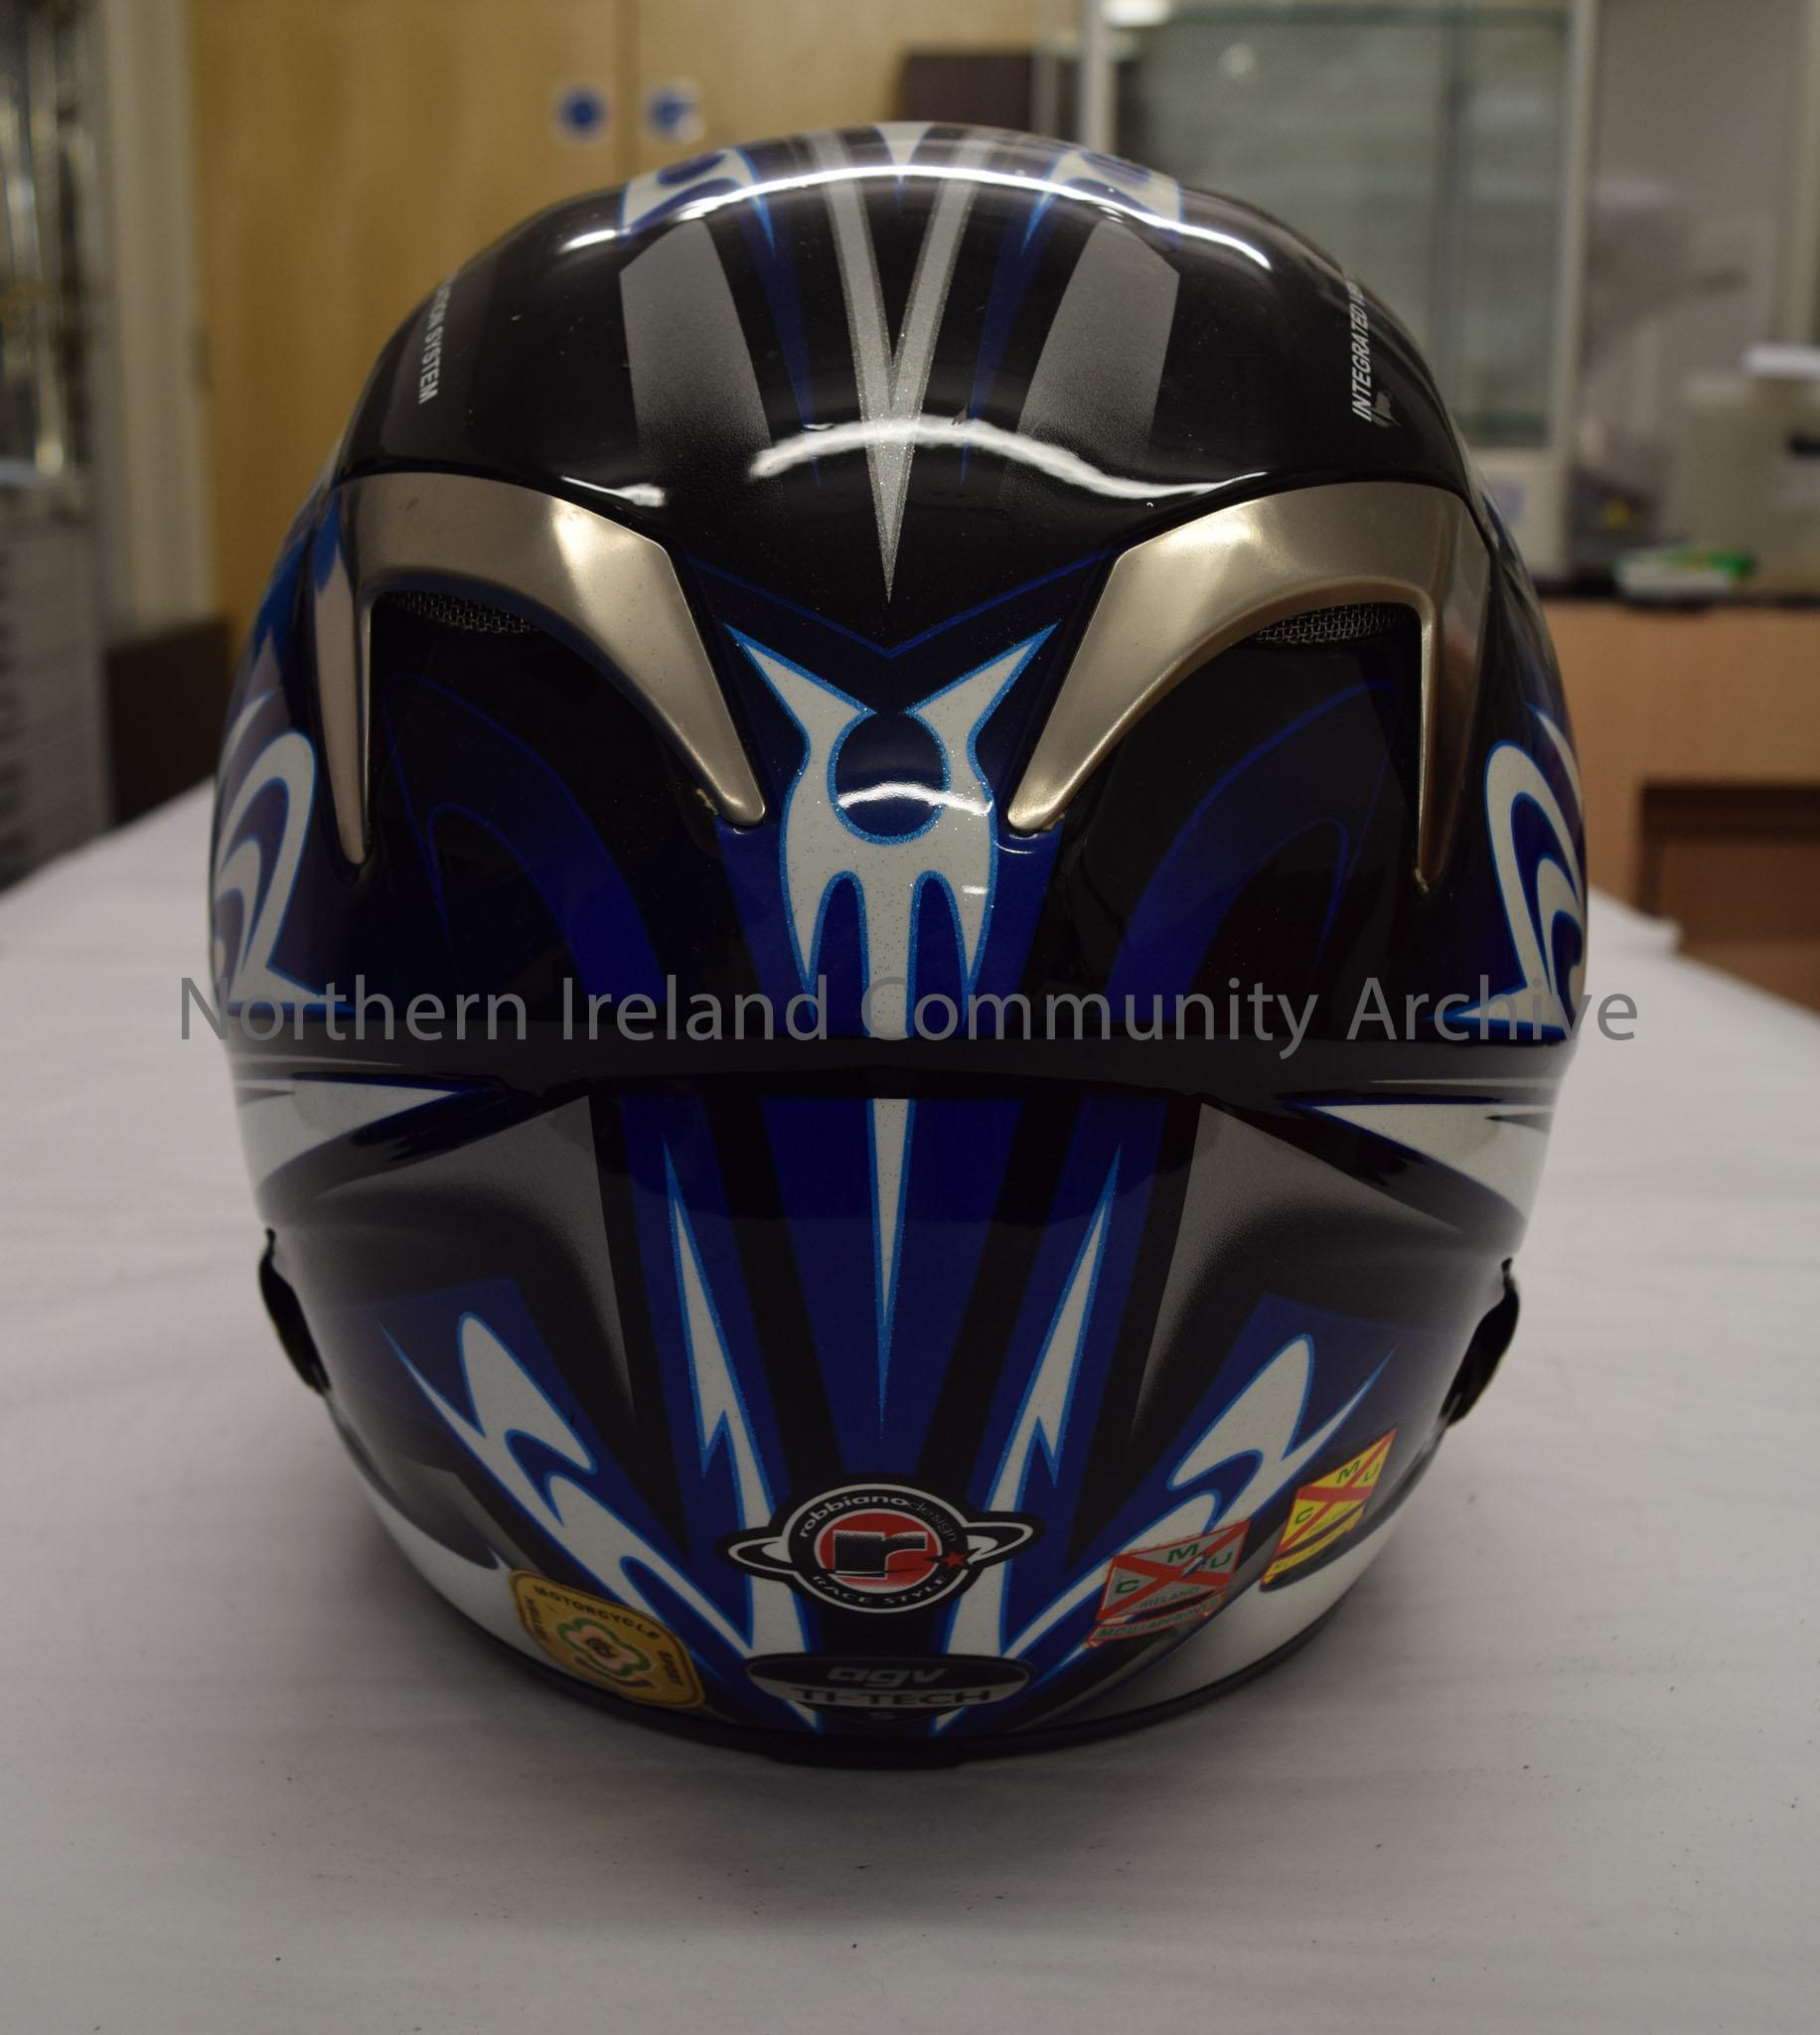 AGV motorcycle helmet belonging to Adrian Archibald. Black helmet with blue, white and silver tribal style pattern on it. Two vents on the chin strap. – 2016.39 (4)